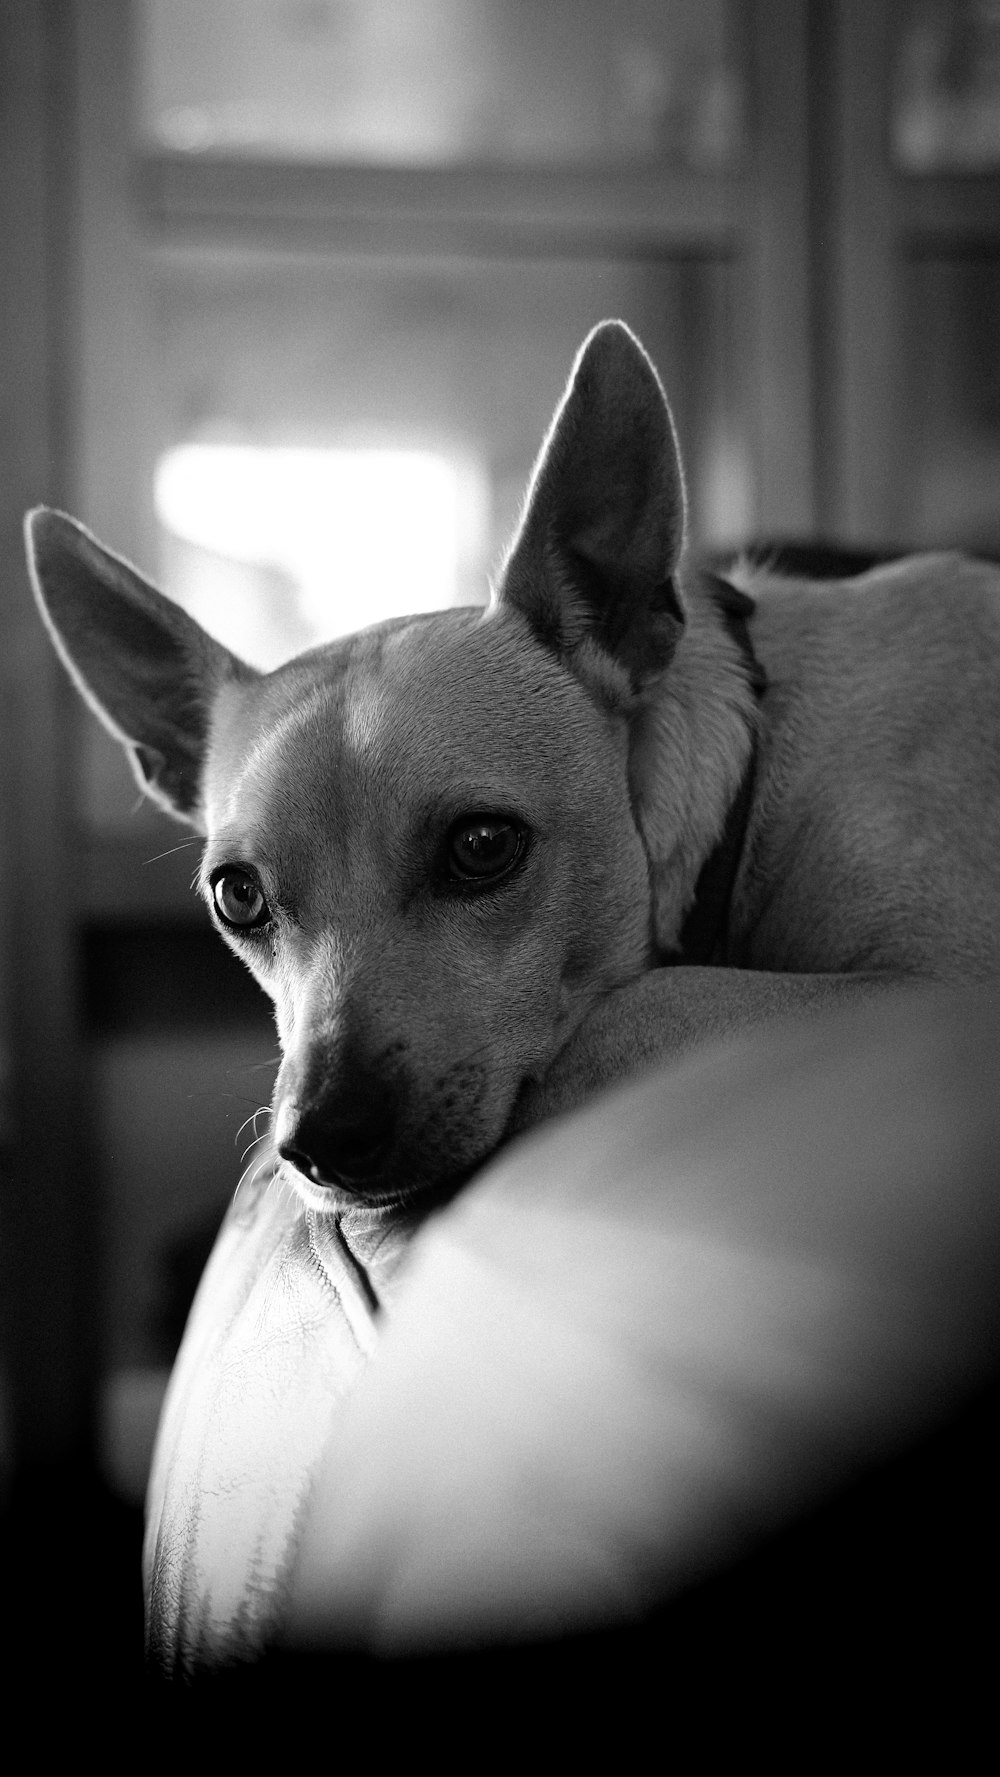 grayscale photo of short coated dog lying on bed